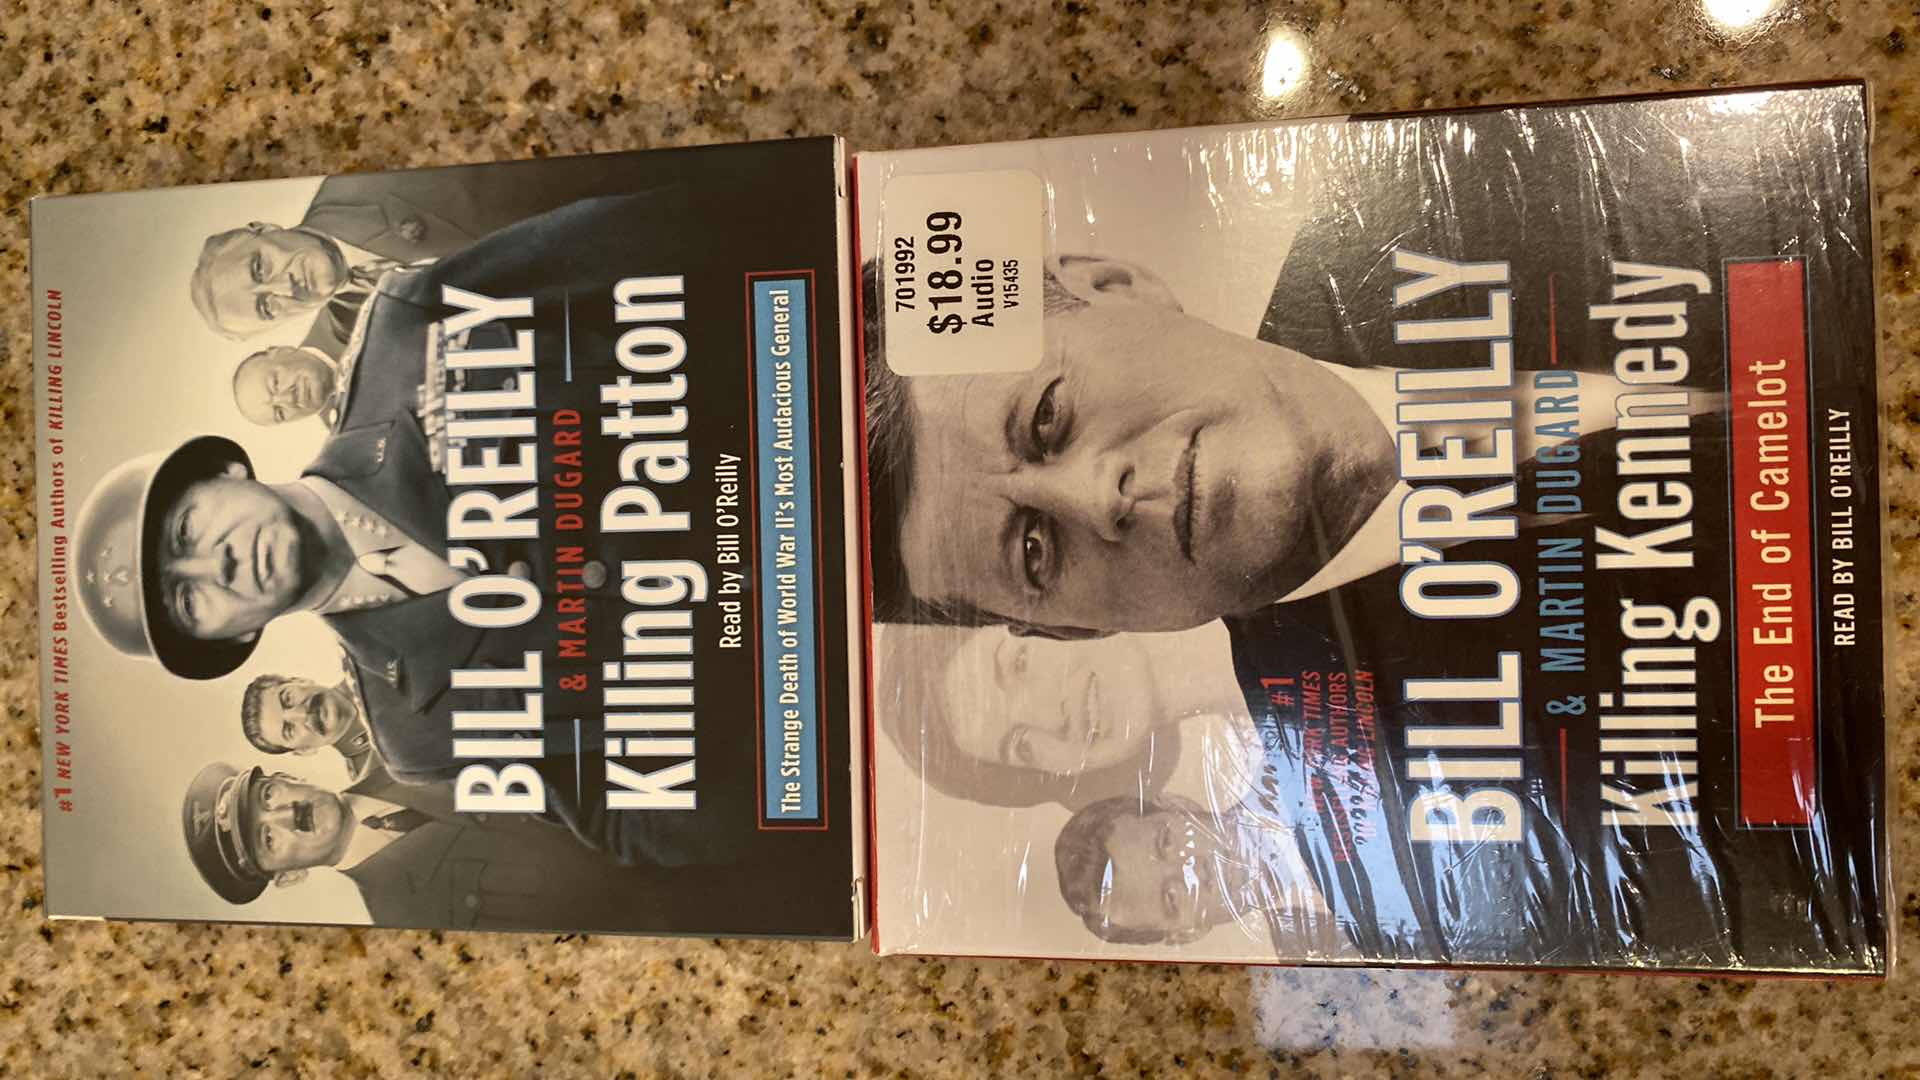 Photo 5 of 6-BILL O’REILLY BOOKS ON CD